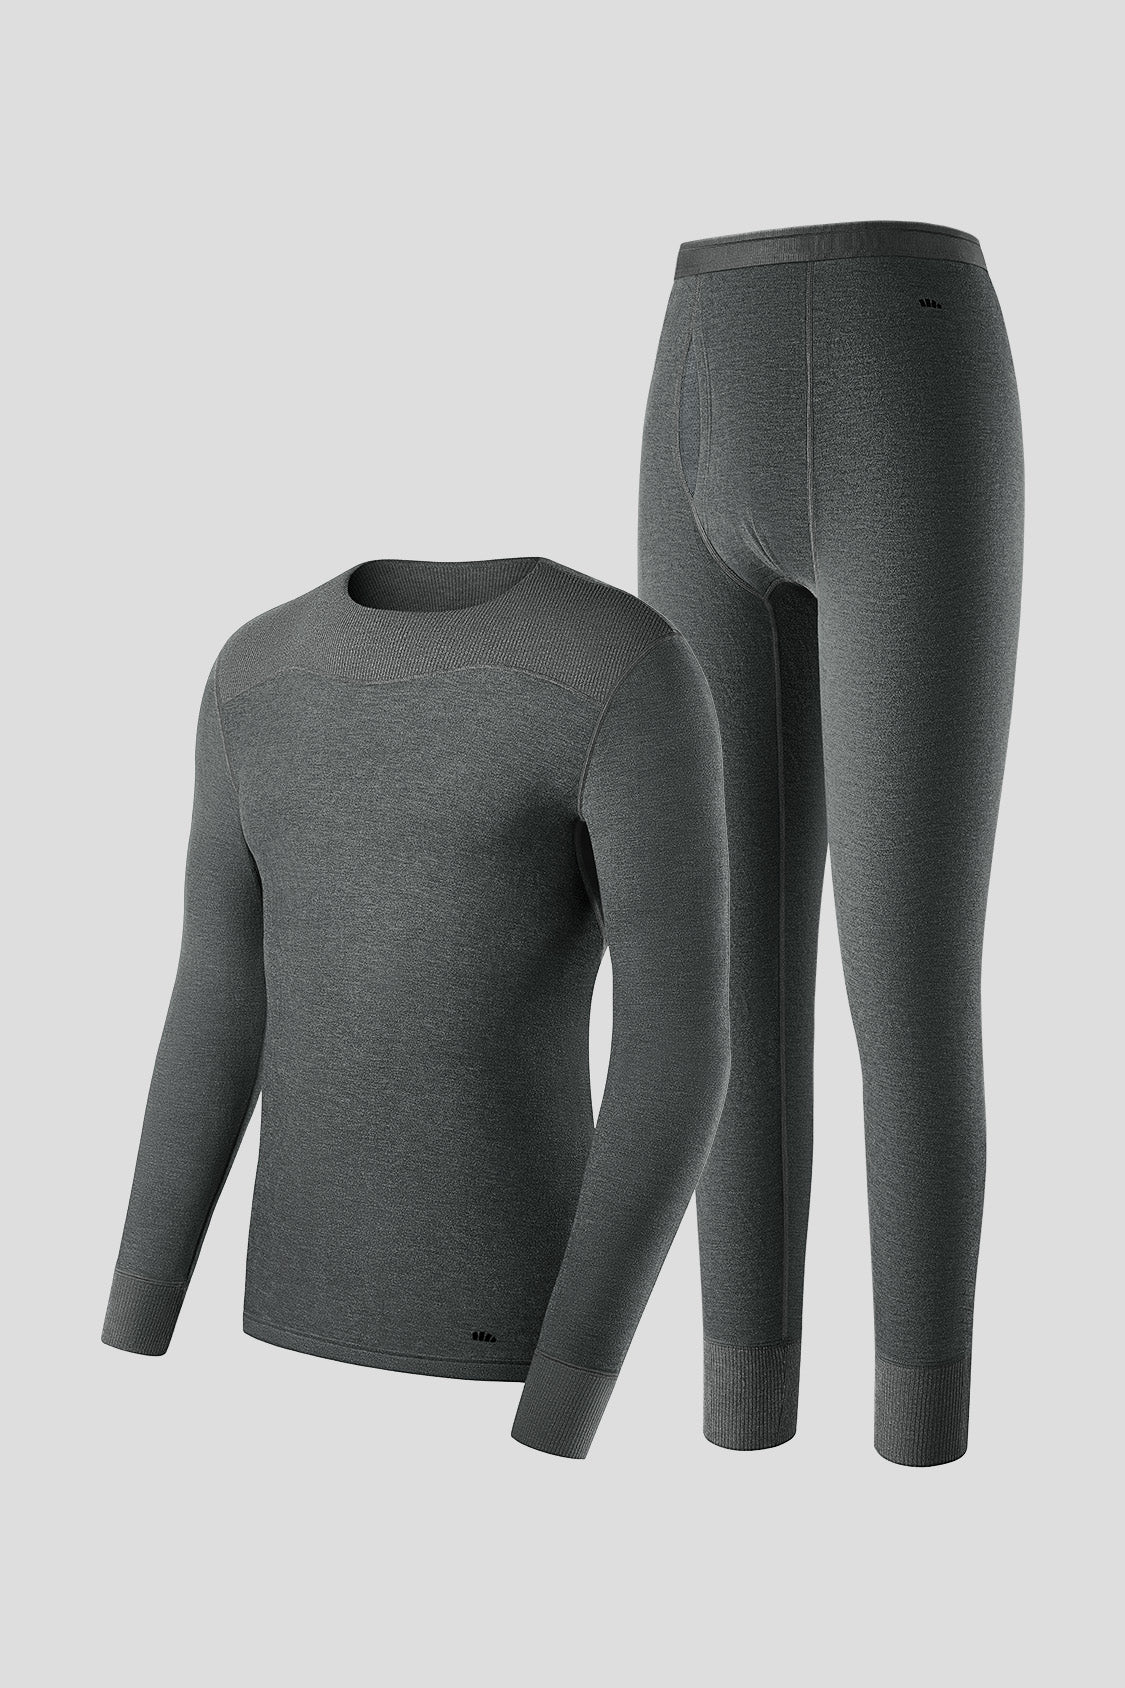 Men's Thermal Underwear Set Functional Athletic Base Layer for